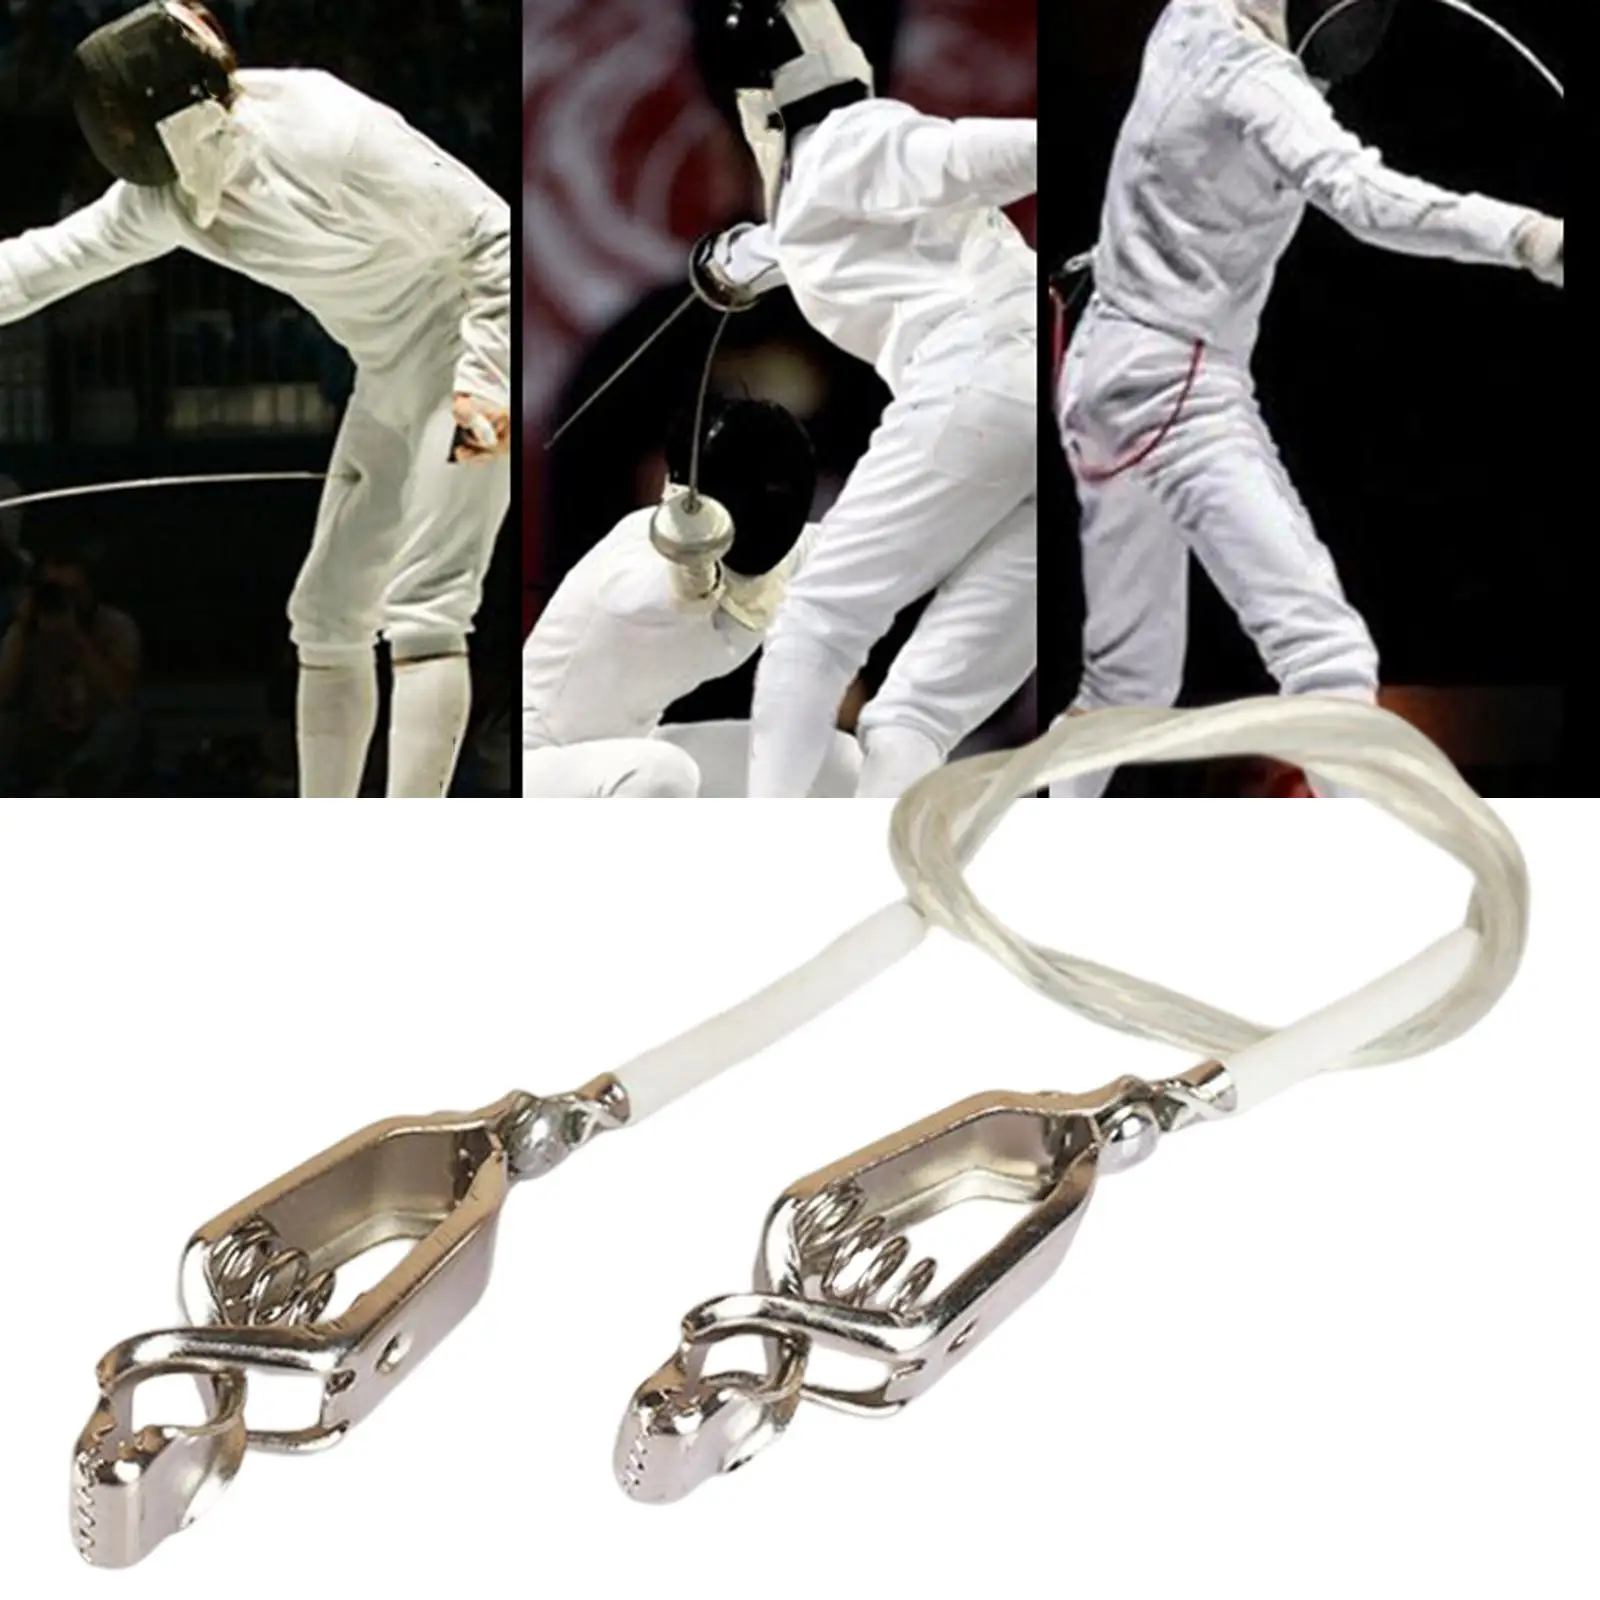 Fencing Mask Cord Equipment Epee Components Flore Spare Parts for Training